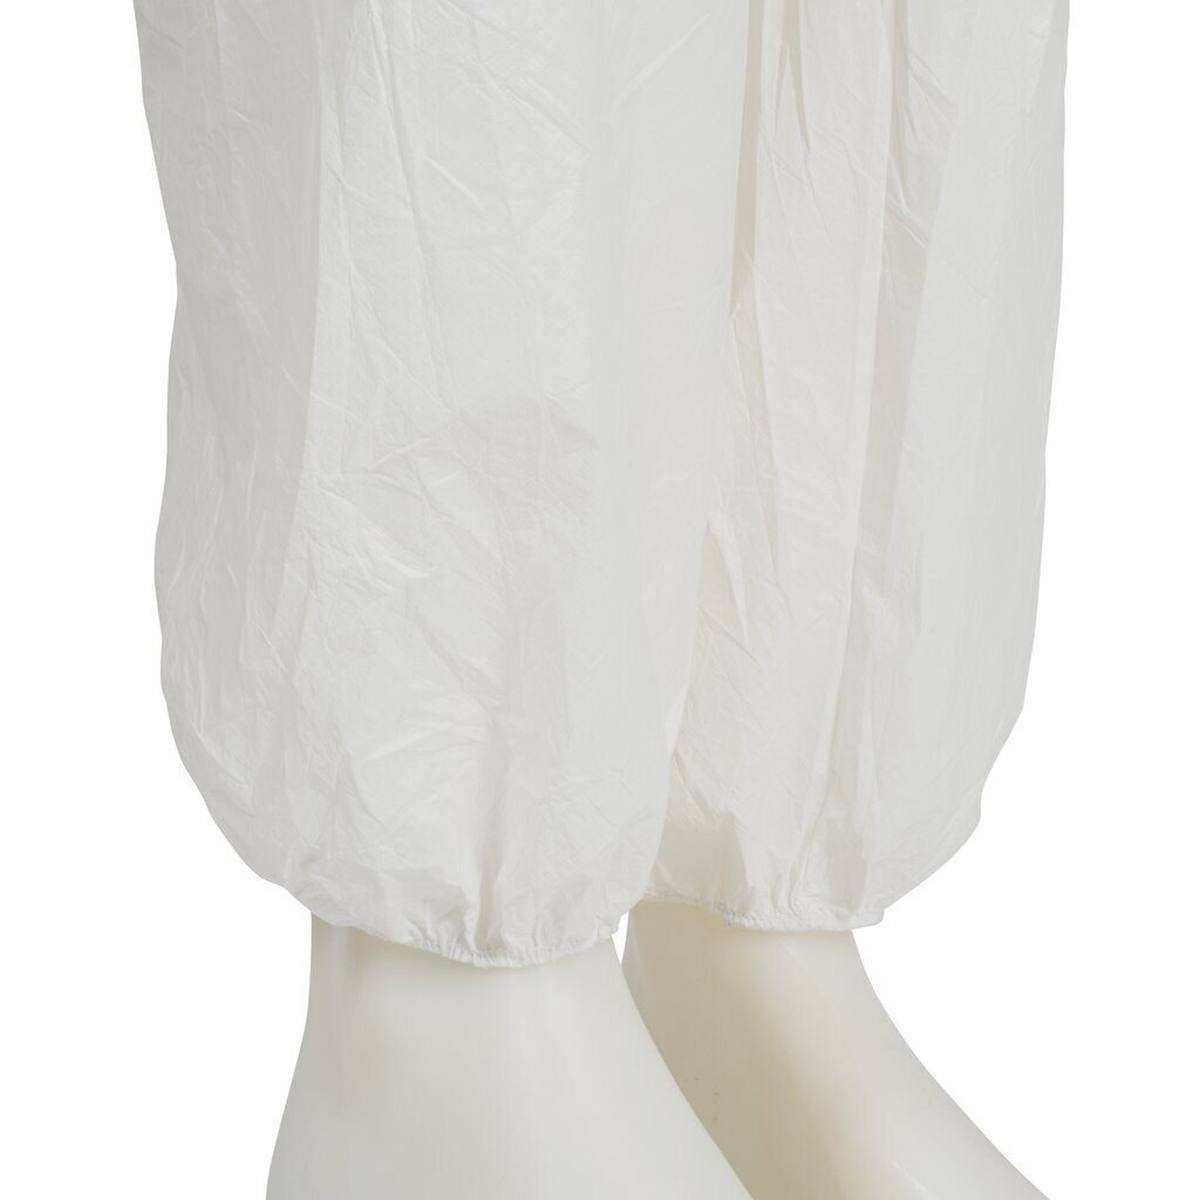 3M 4545 Protective coverall, white, TYPE 5/6, size 3XL, material PE laminate, antistatic coating, particularly low-linting, detachable zip, knitted cuffs